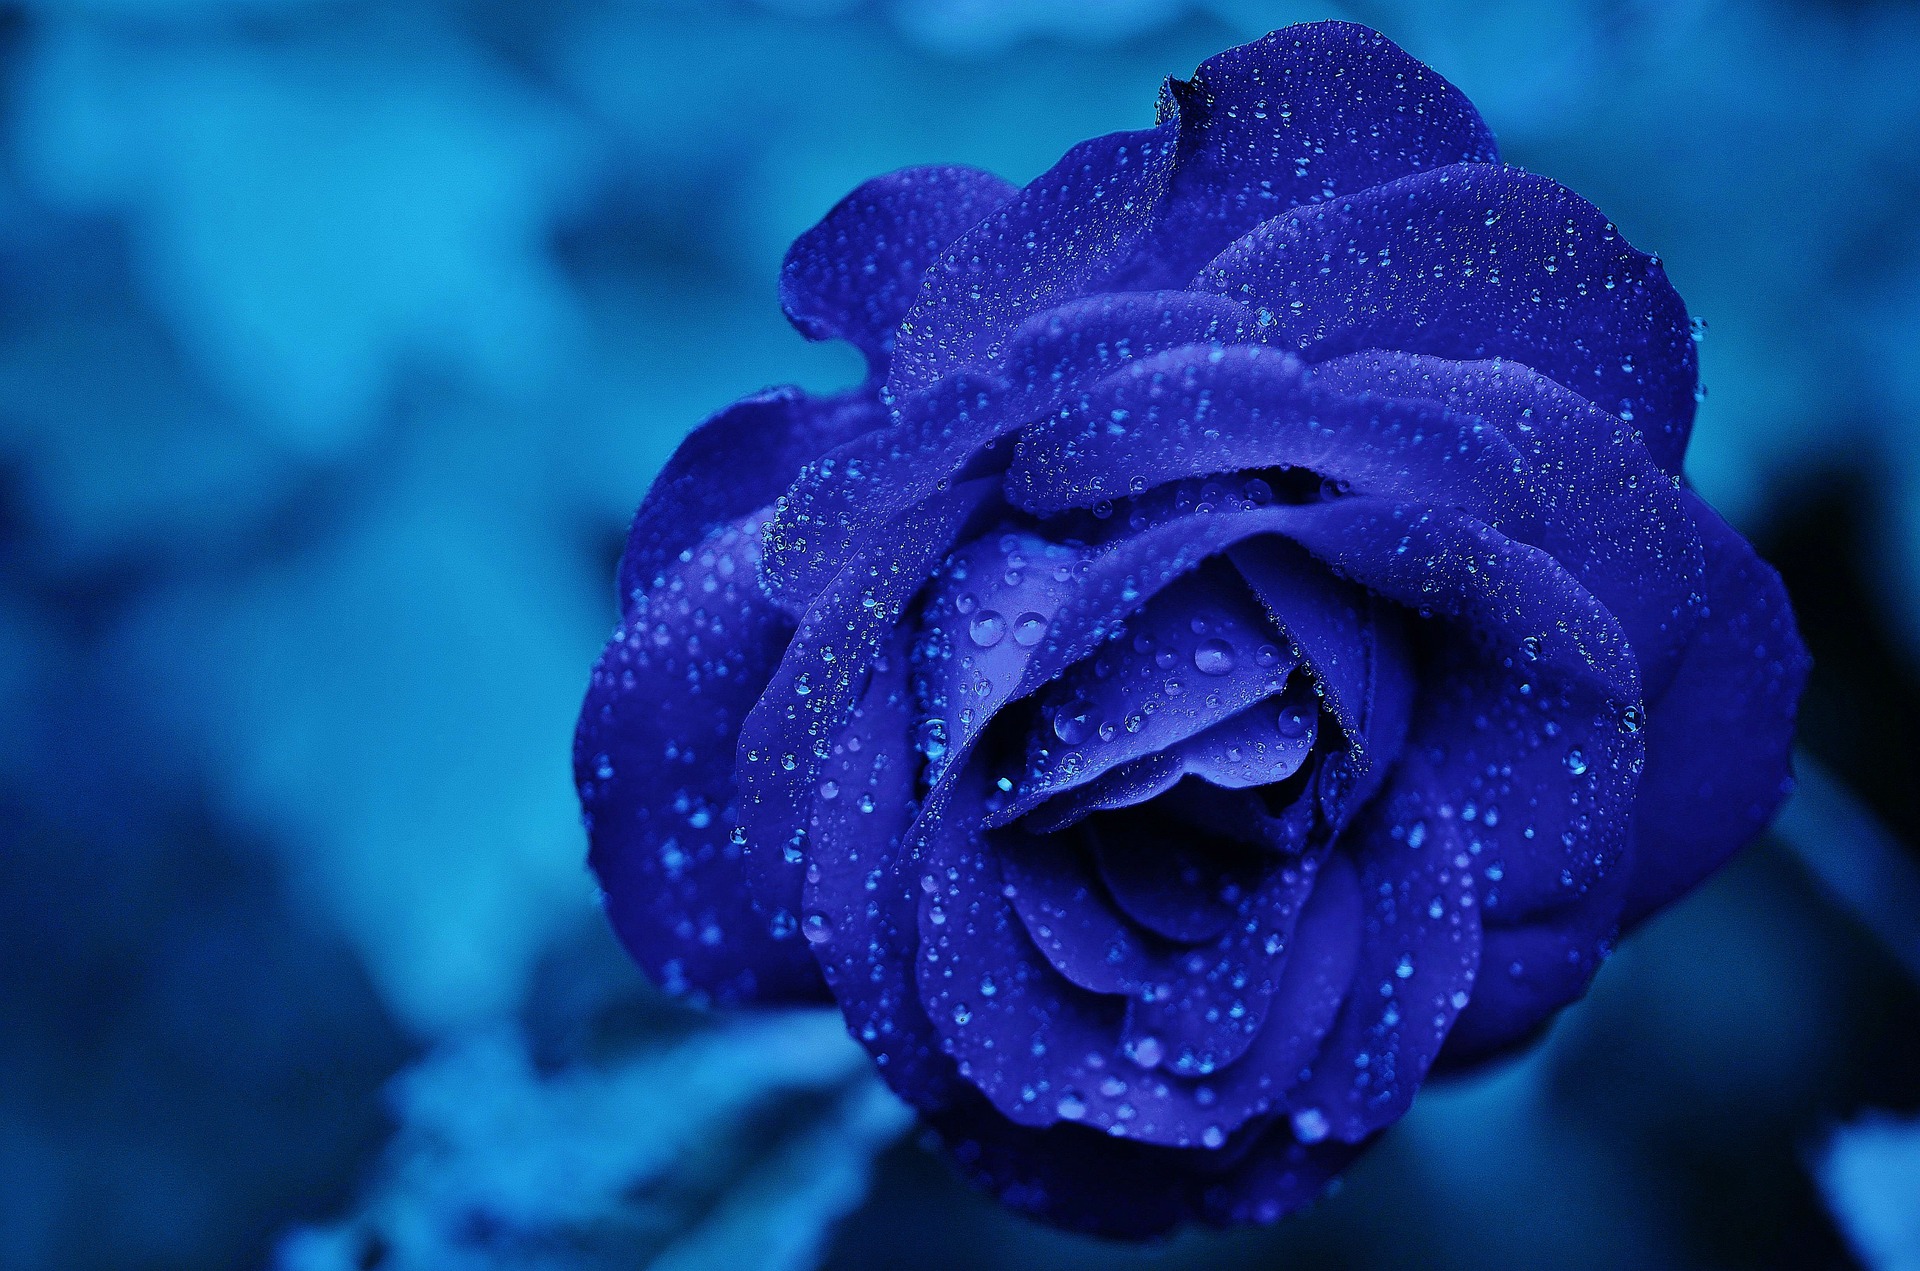 Blue Rose Wallpaper HD Pictures One